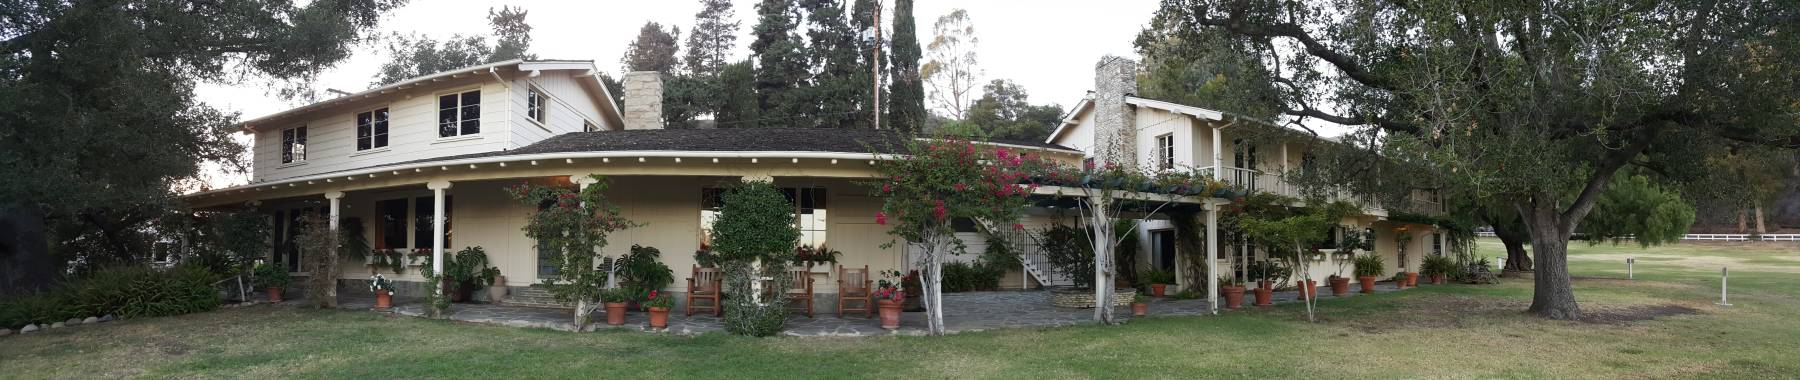 Picnic and Insider Tour - Will Rogers Ranch in Pacific Palisades